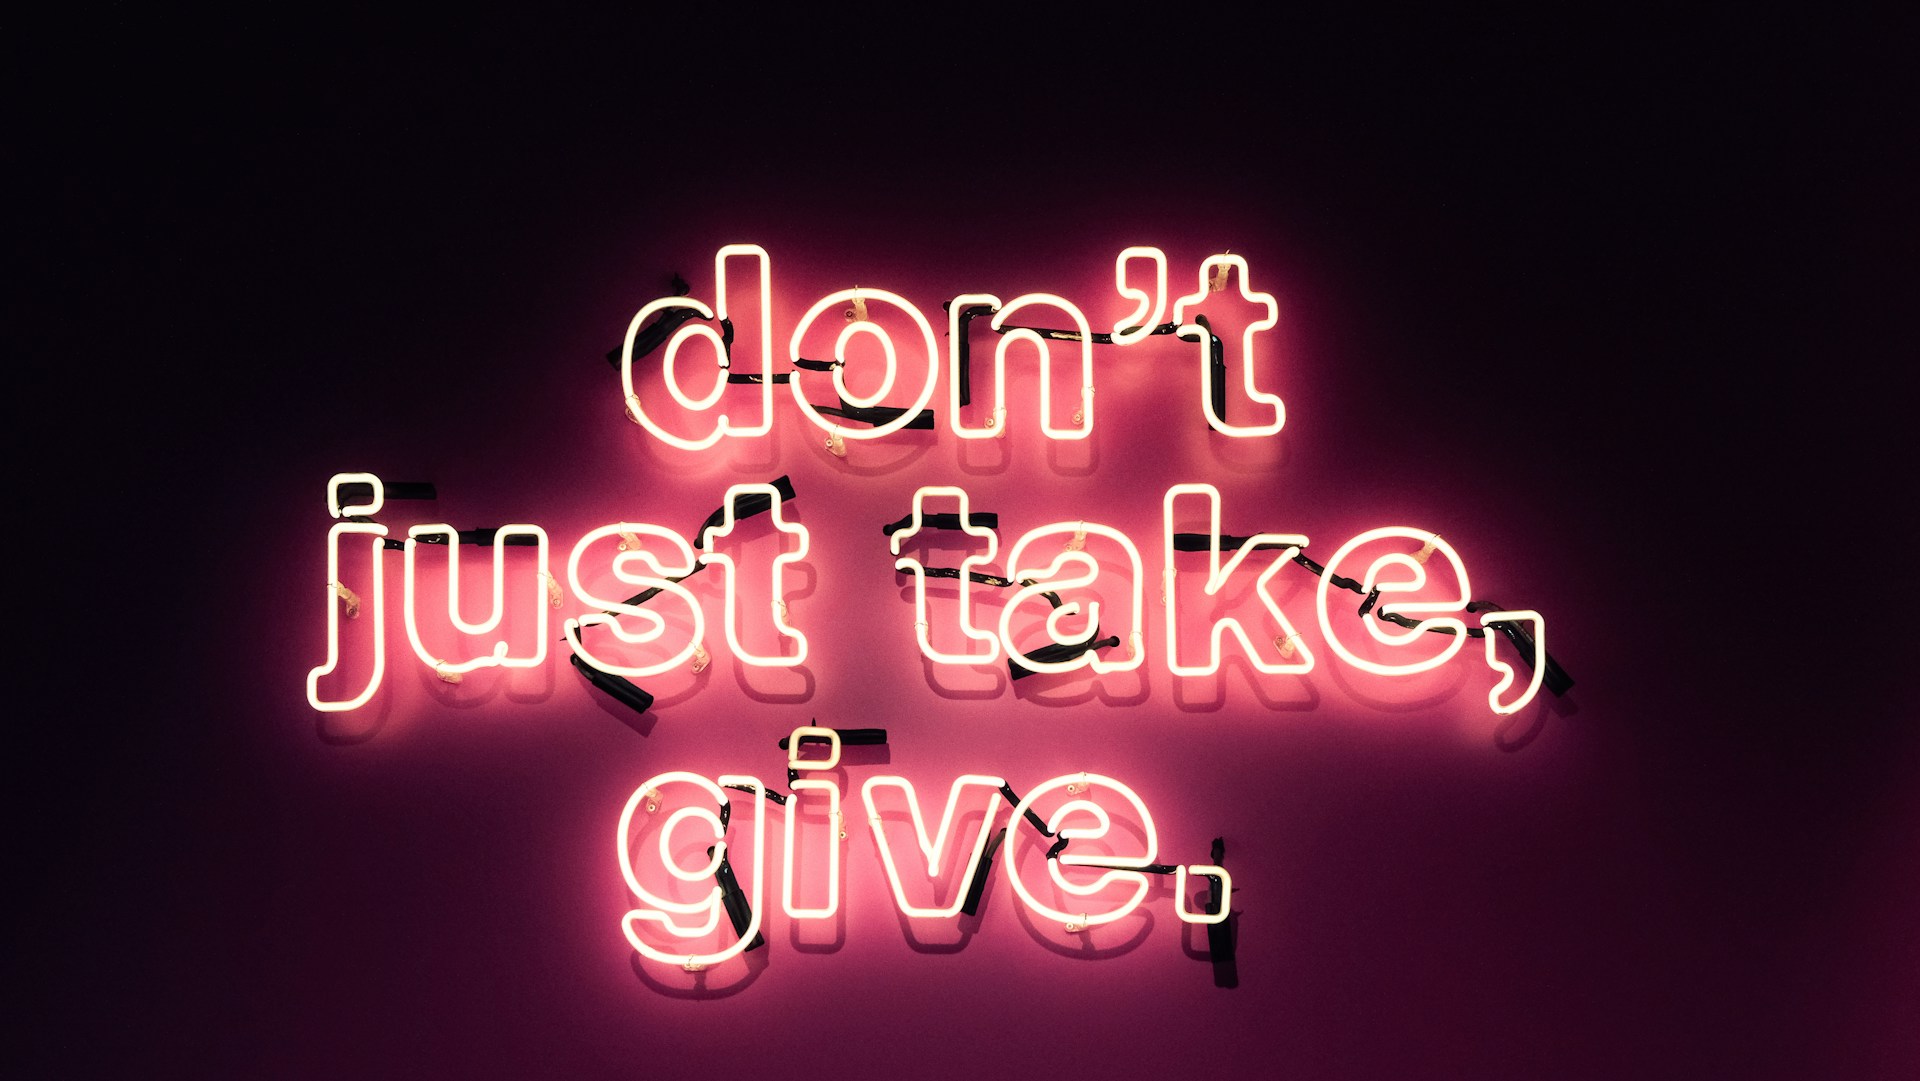 Neon sign reads "don't just take, give." This illustrates the question of whether authors should give their books away for free.